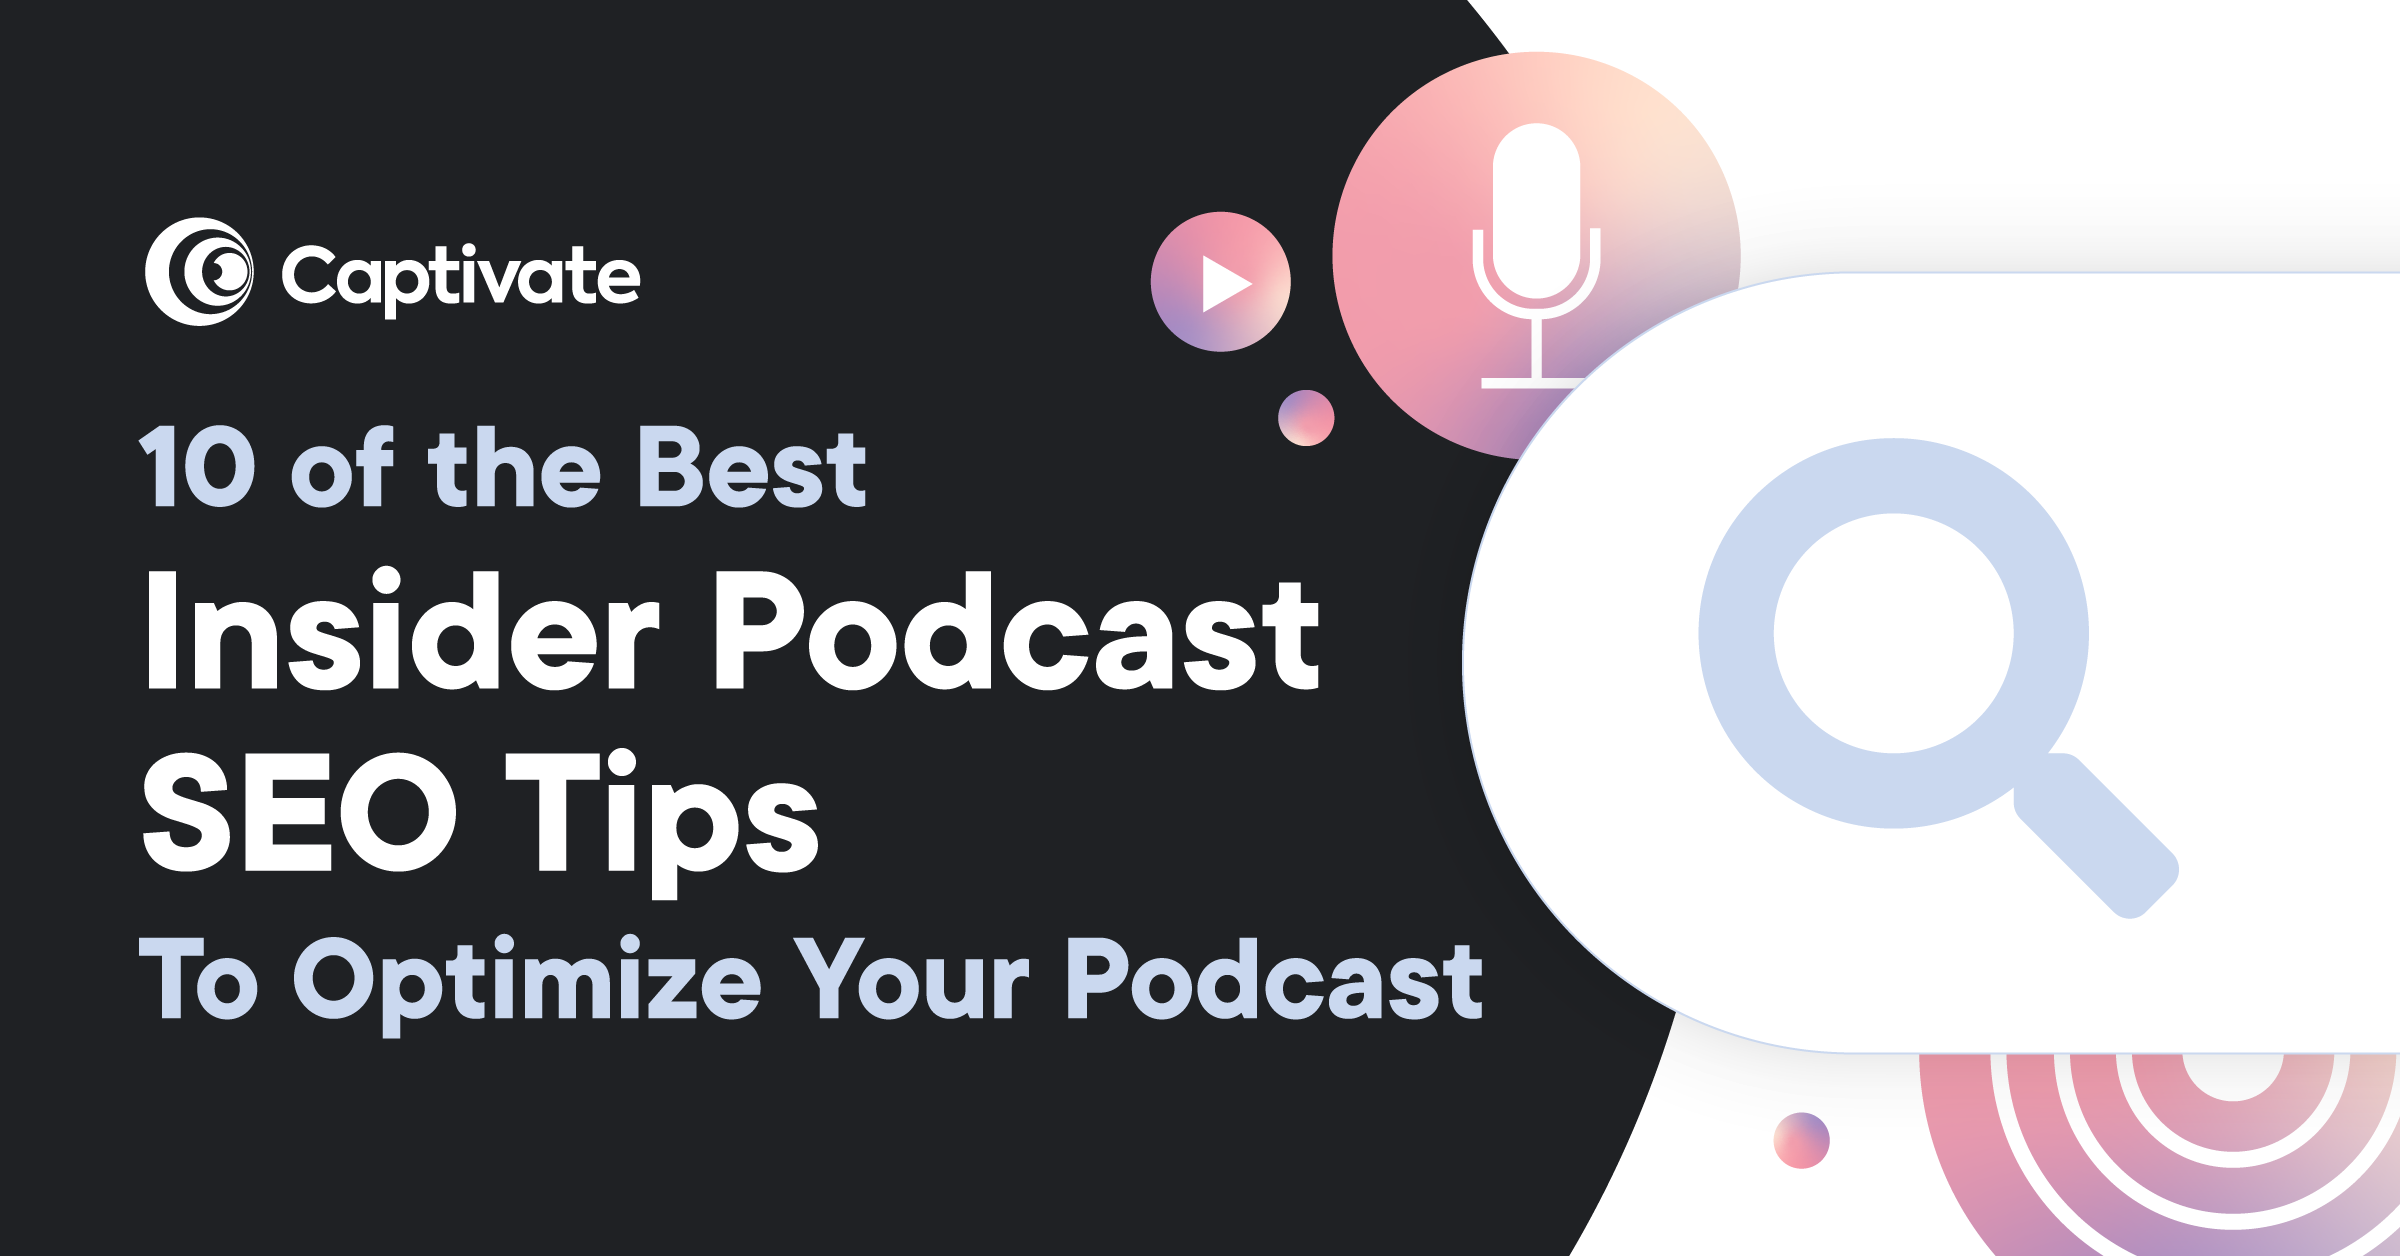 Image featuring text: 10 of the best insider podcast SEO tips to optimize your podcast